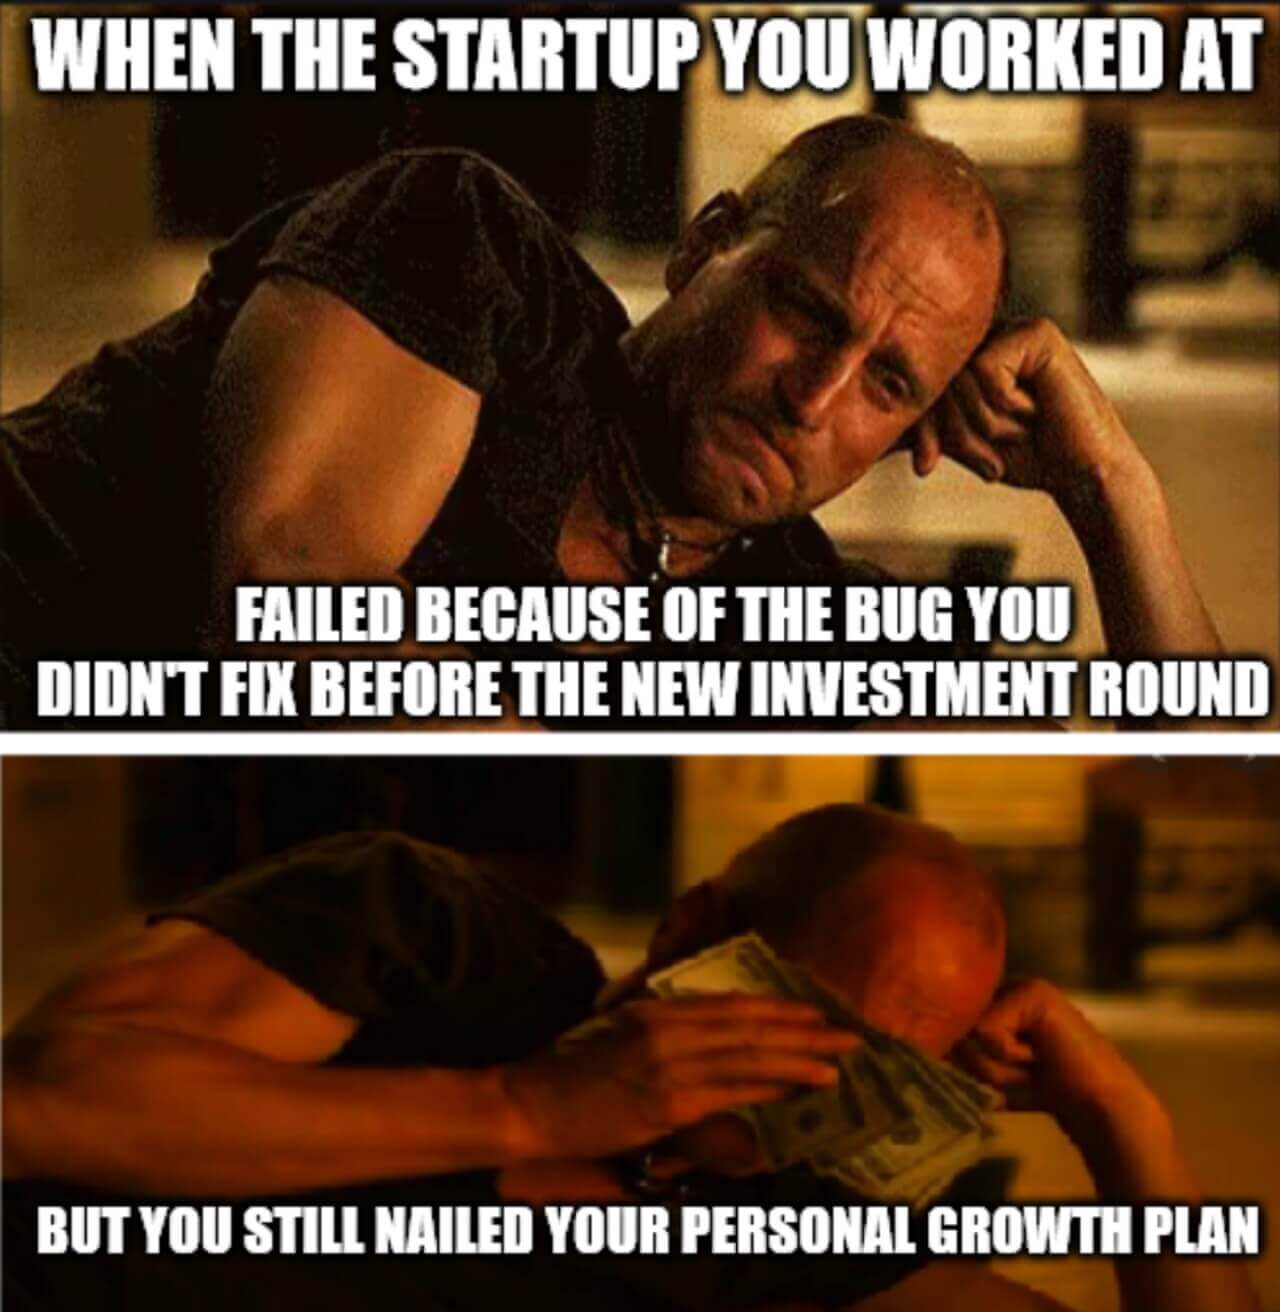 When the startup you worked at failed